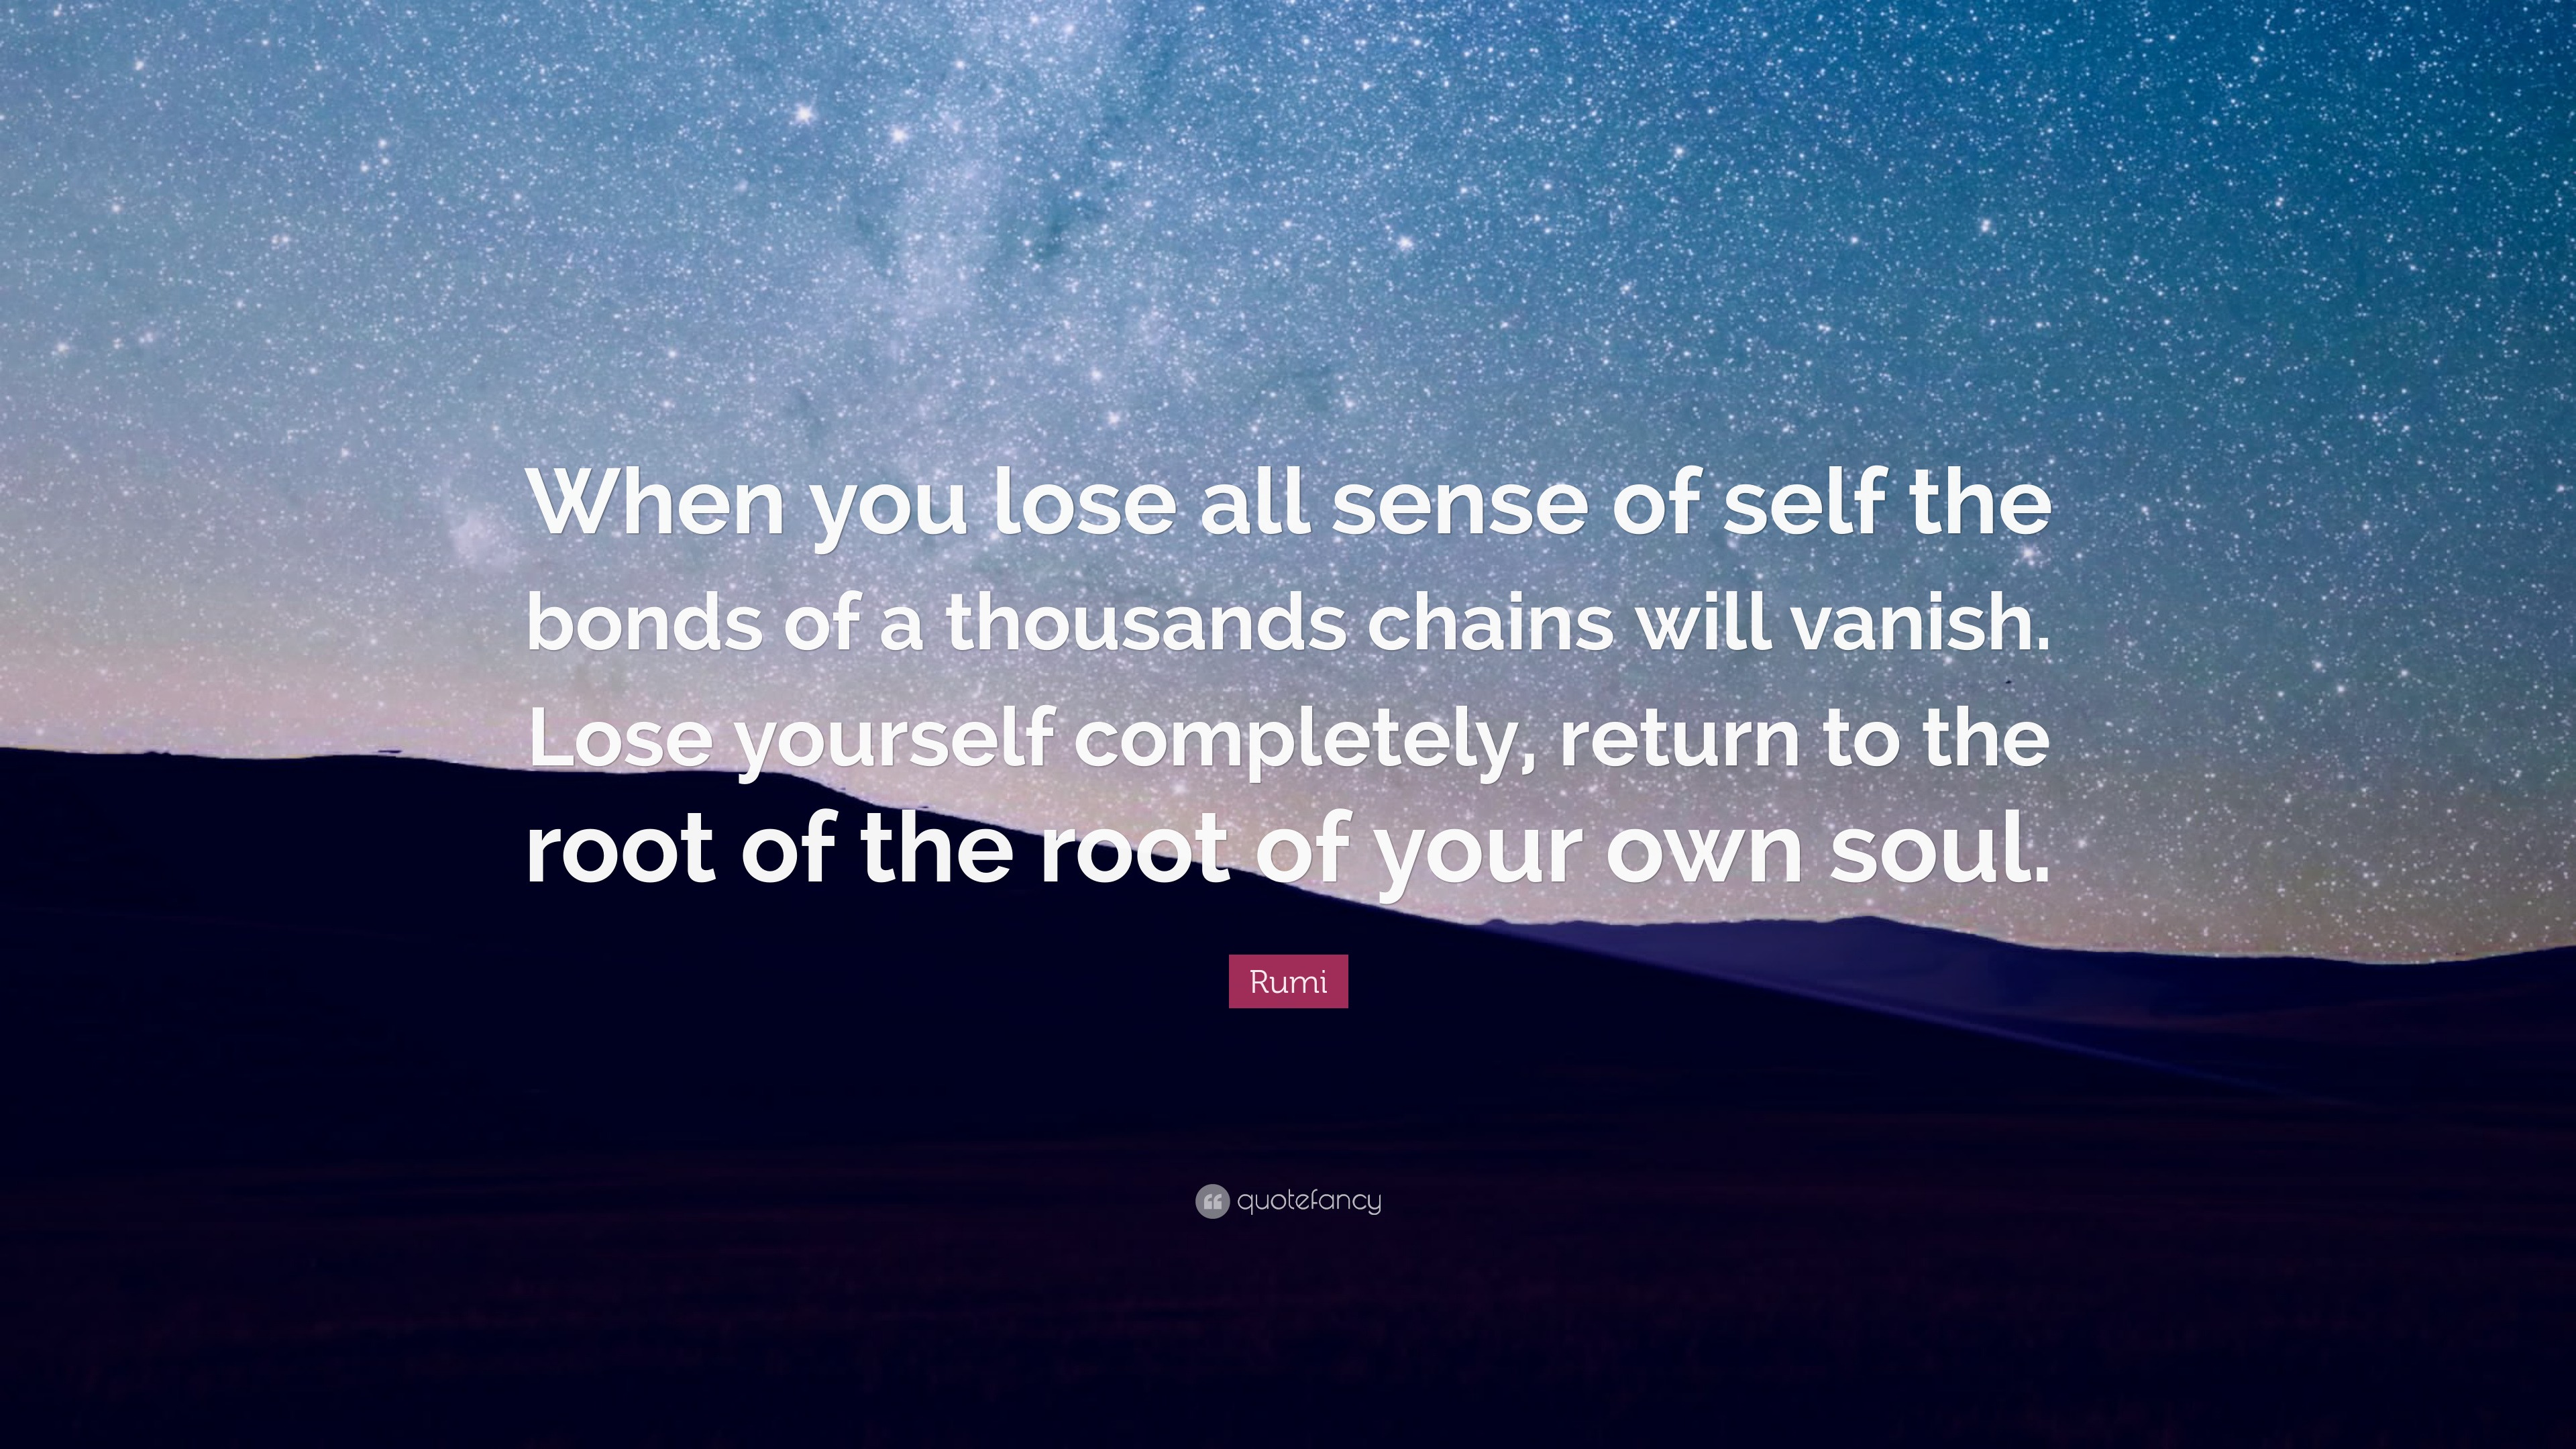 Rumi Quote: “When you lose all sense of self the bonds of a thousands